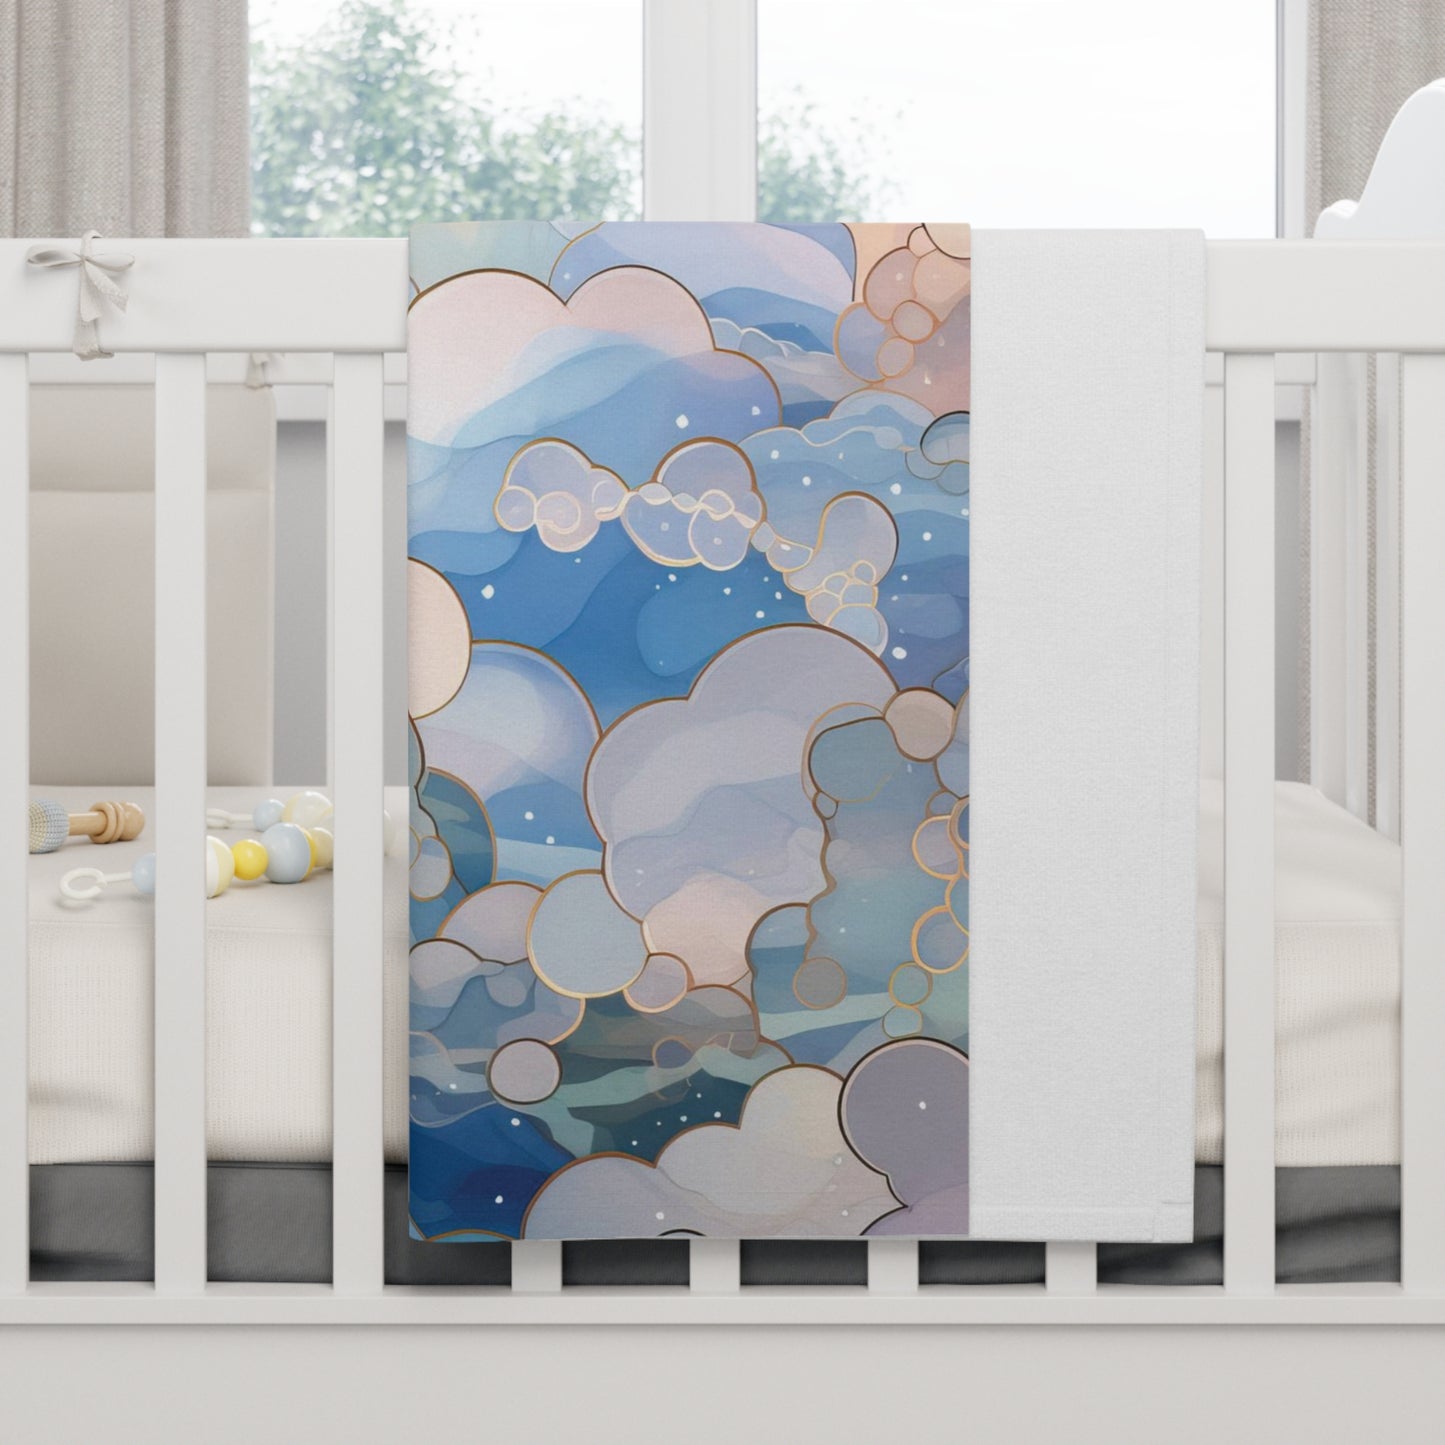 Stained Glass Clouds Boho Baby Blanket, Blue Clouds Print